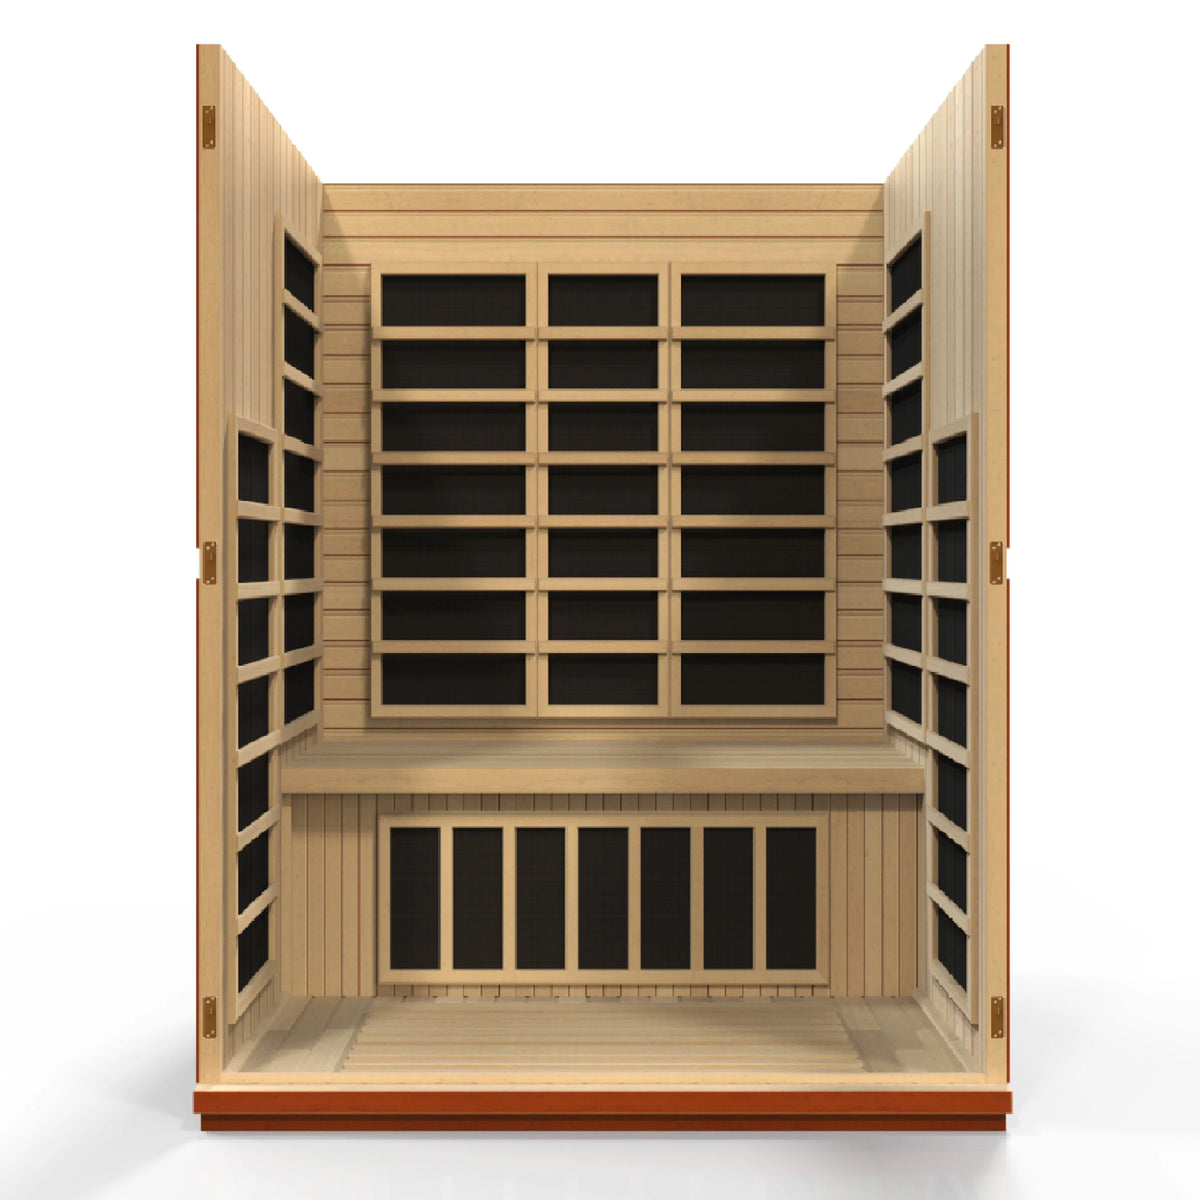 Bellagio 3 Person Low EMF Infrared Sauna - Promo Code "calmspas30" for $30 Off / Ships in April